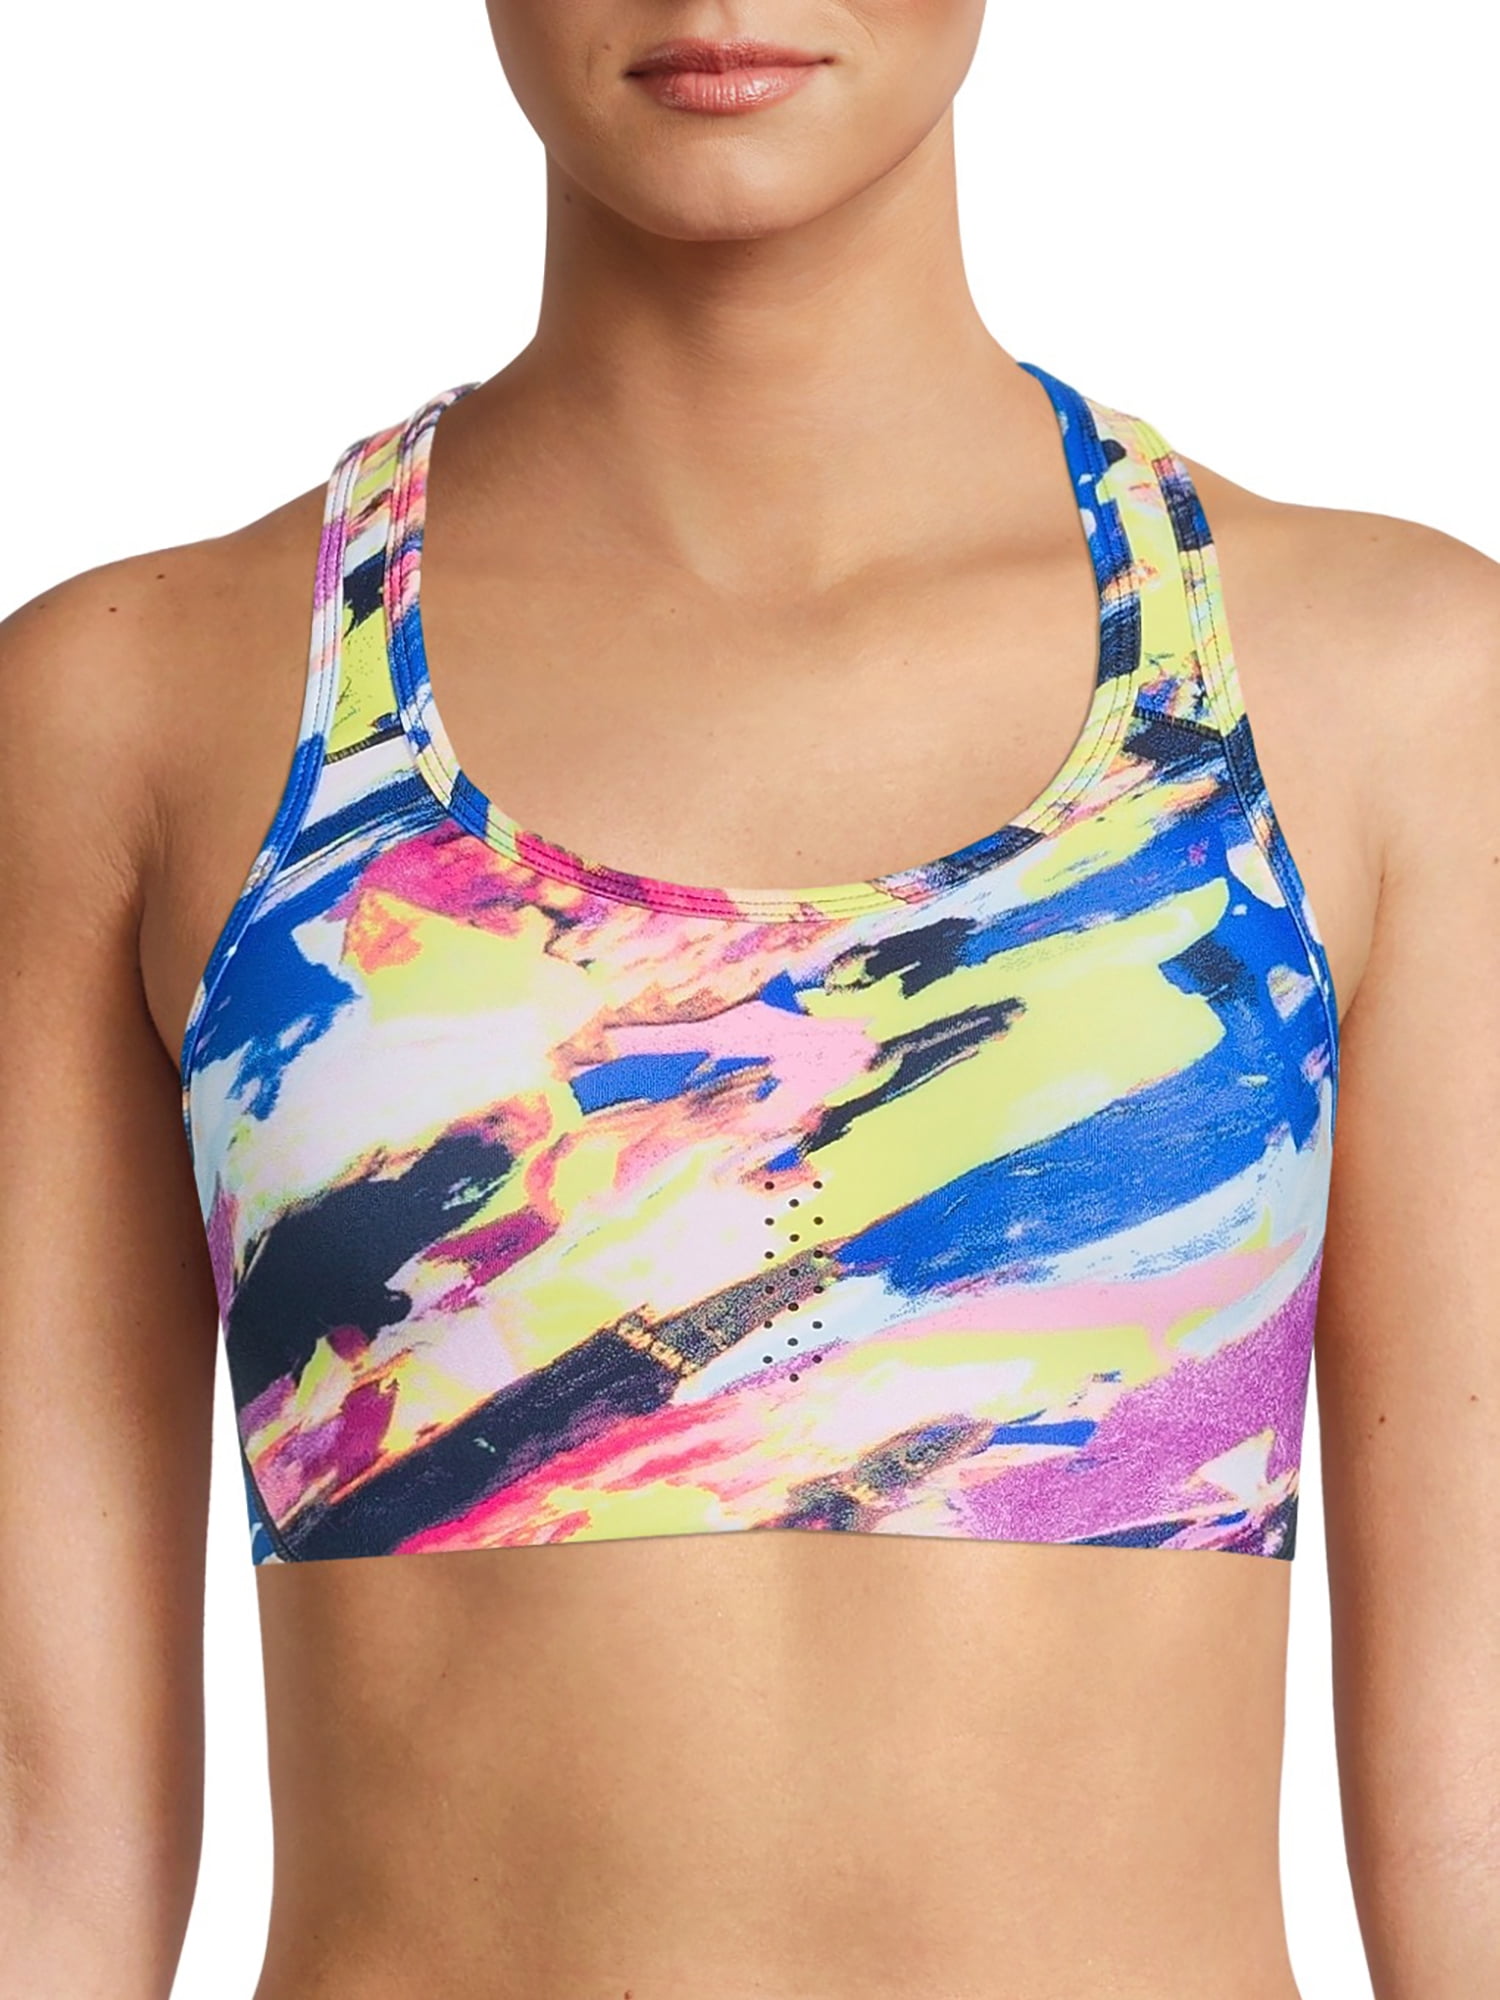 Buy Avia Womens Active Molded Cup Sports Bra at Ubuy Paraguay